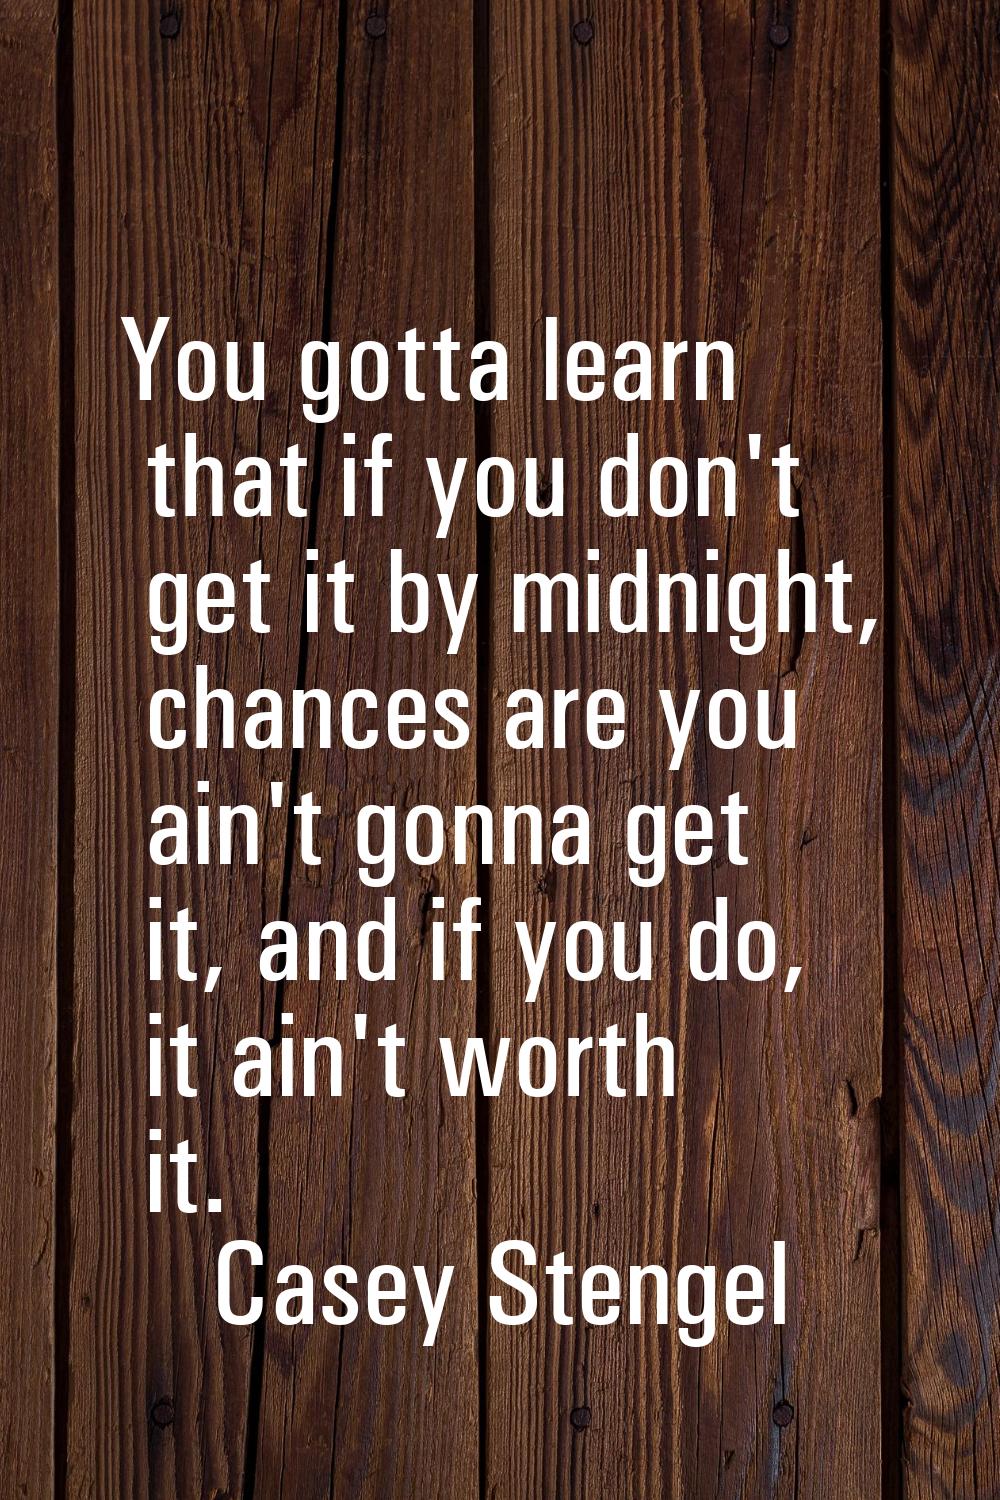 You gotta learn that if you don't get it by midnight, chances are you ain't gonna get it, and if yo